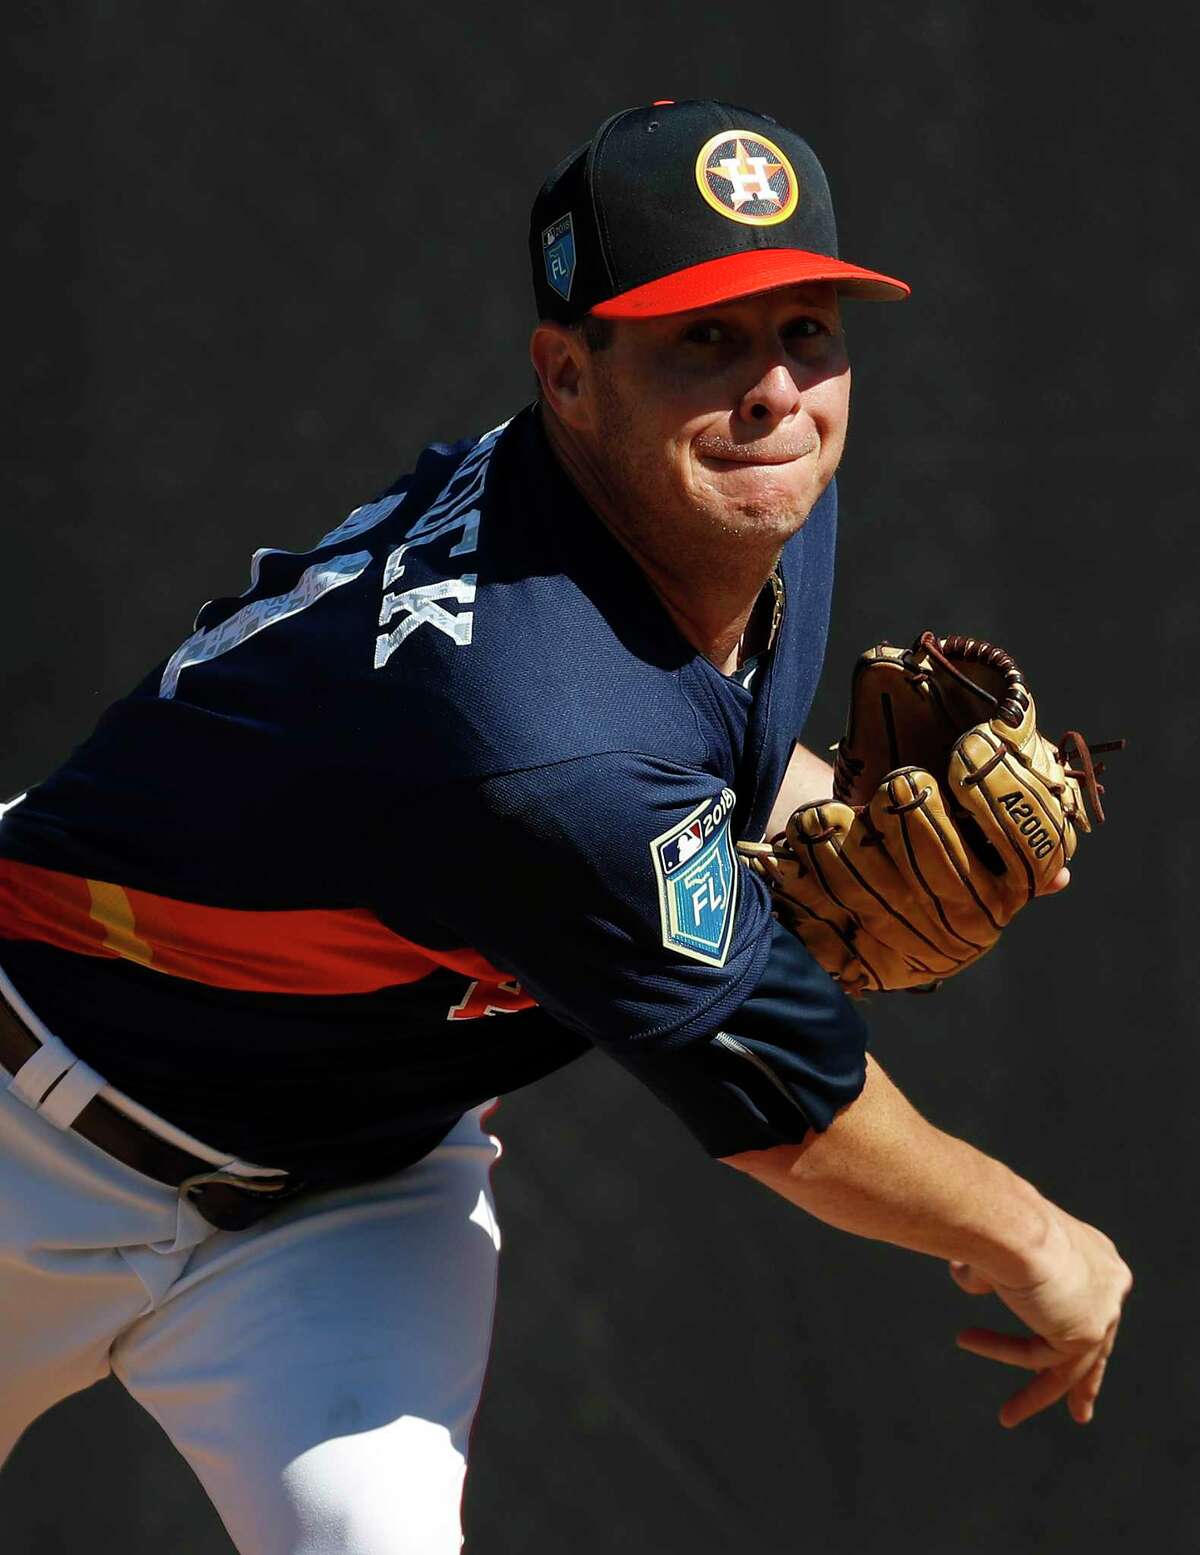 While going 13-2 last season, Brad Peacock led the Astros staff with 11 strikeouts per nine innings.